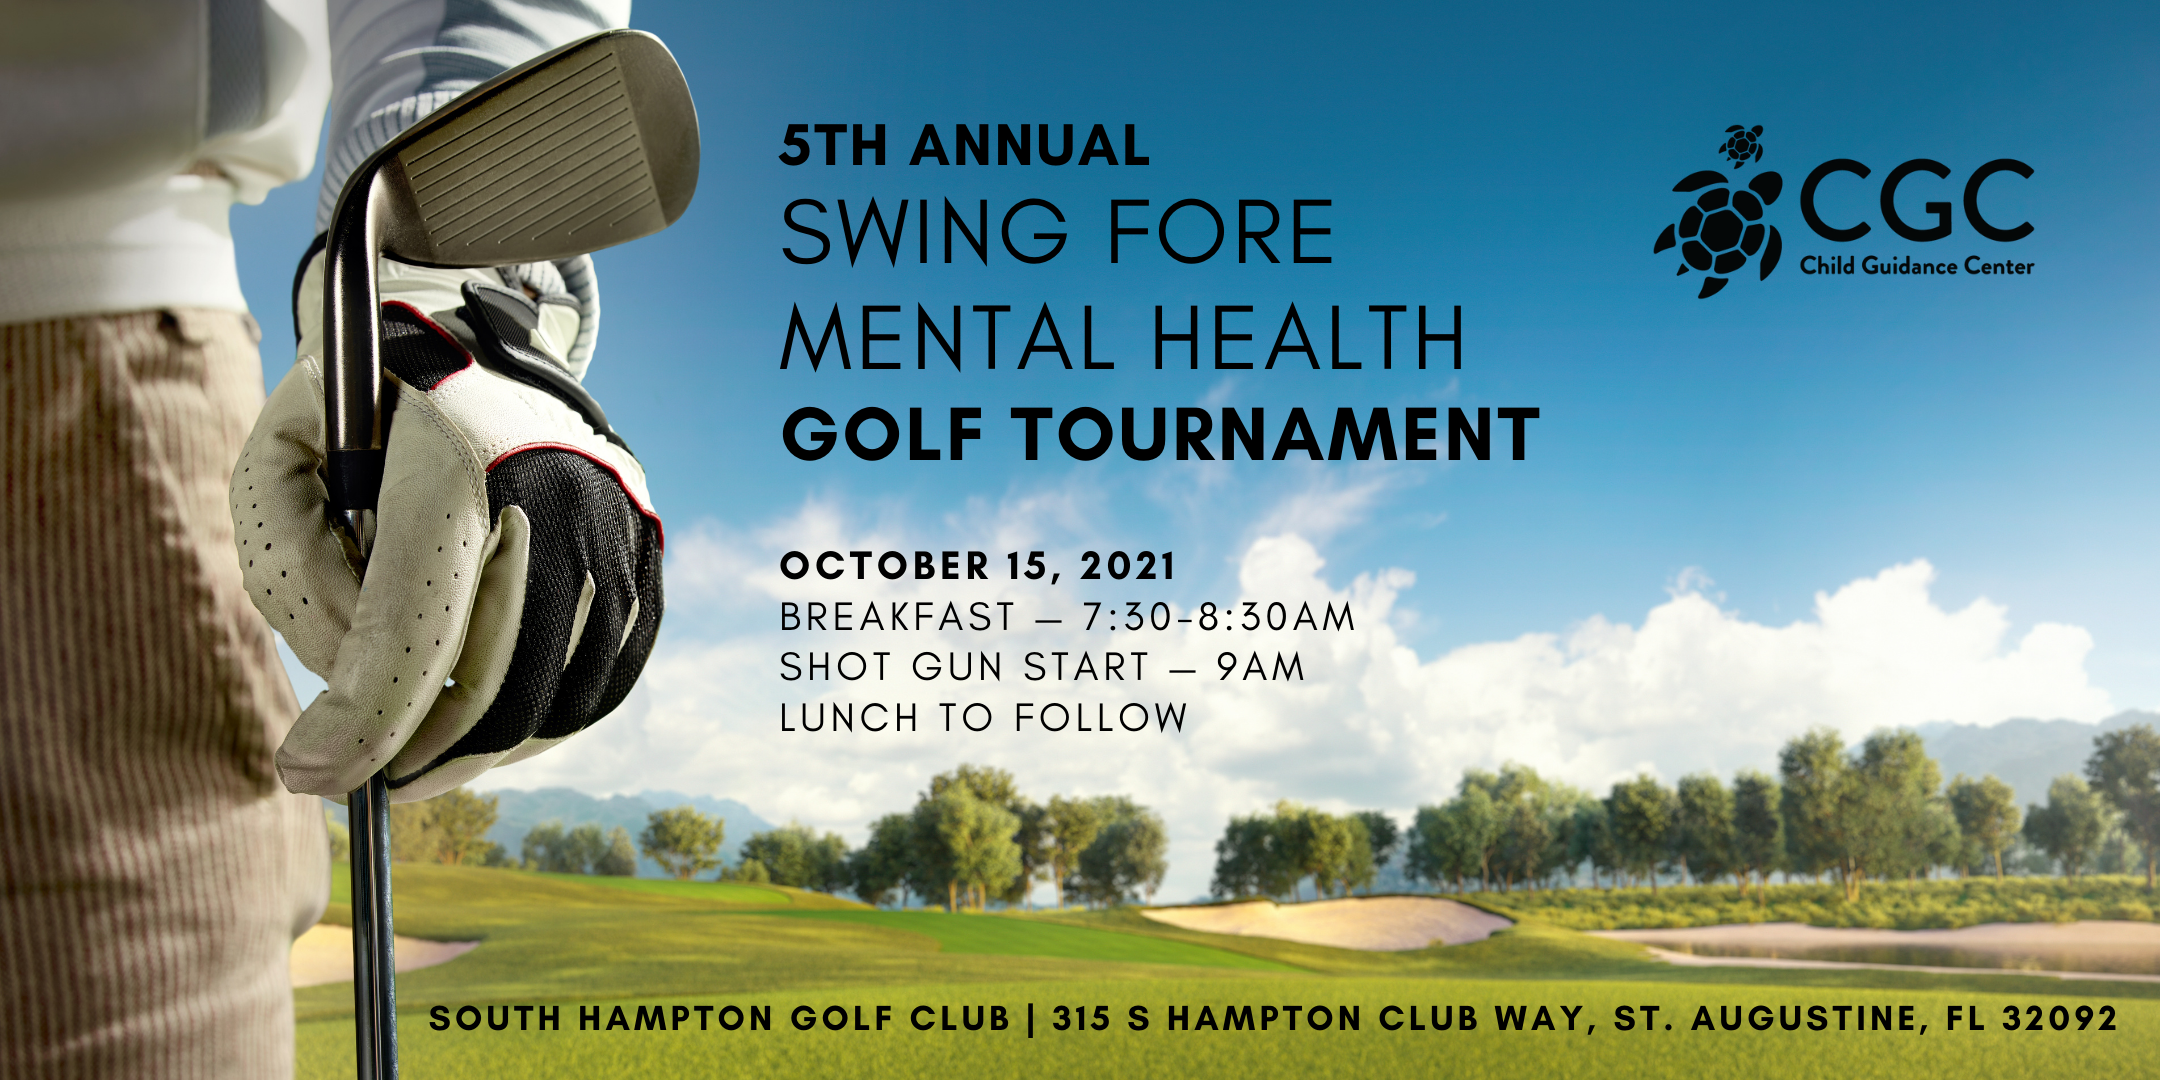 5th Annual Swing Fore Mental Health Golf Tournament